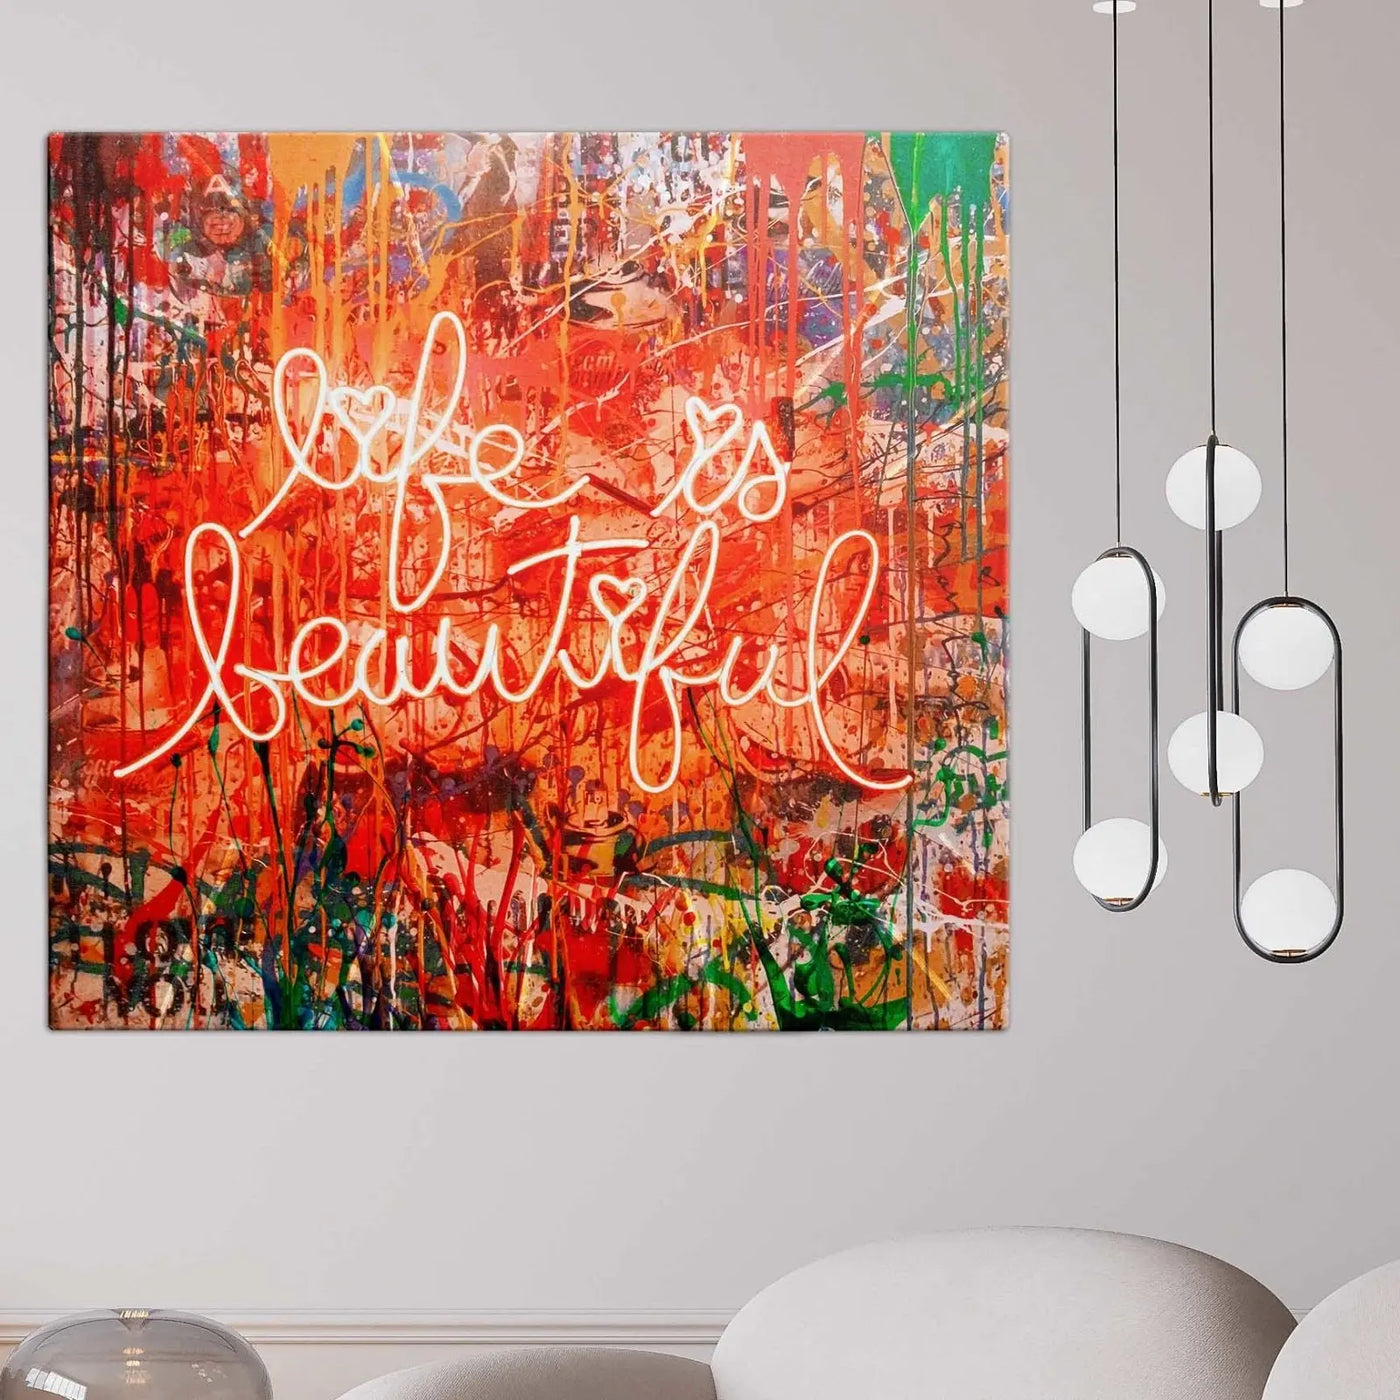 "LIFE IS BEAUTIFUL" - Art For Everyone